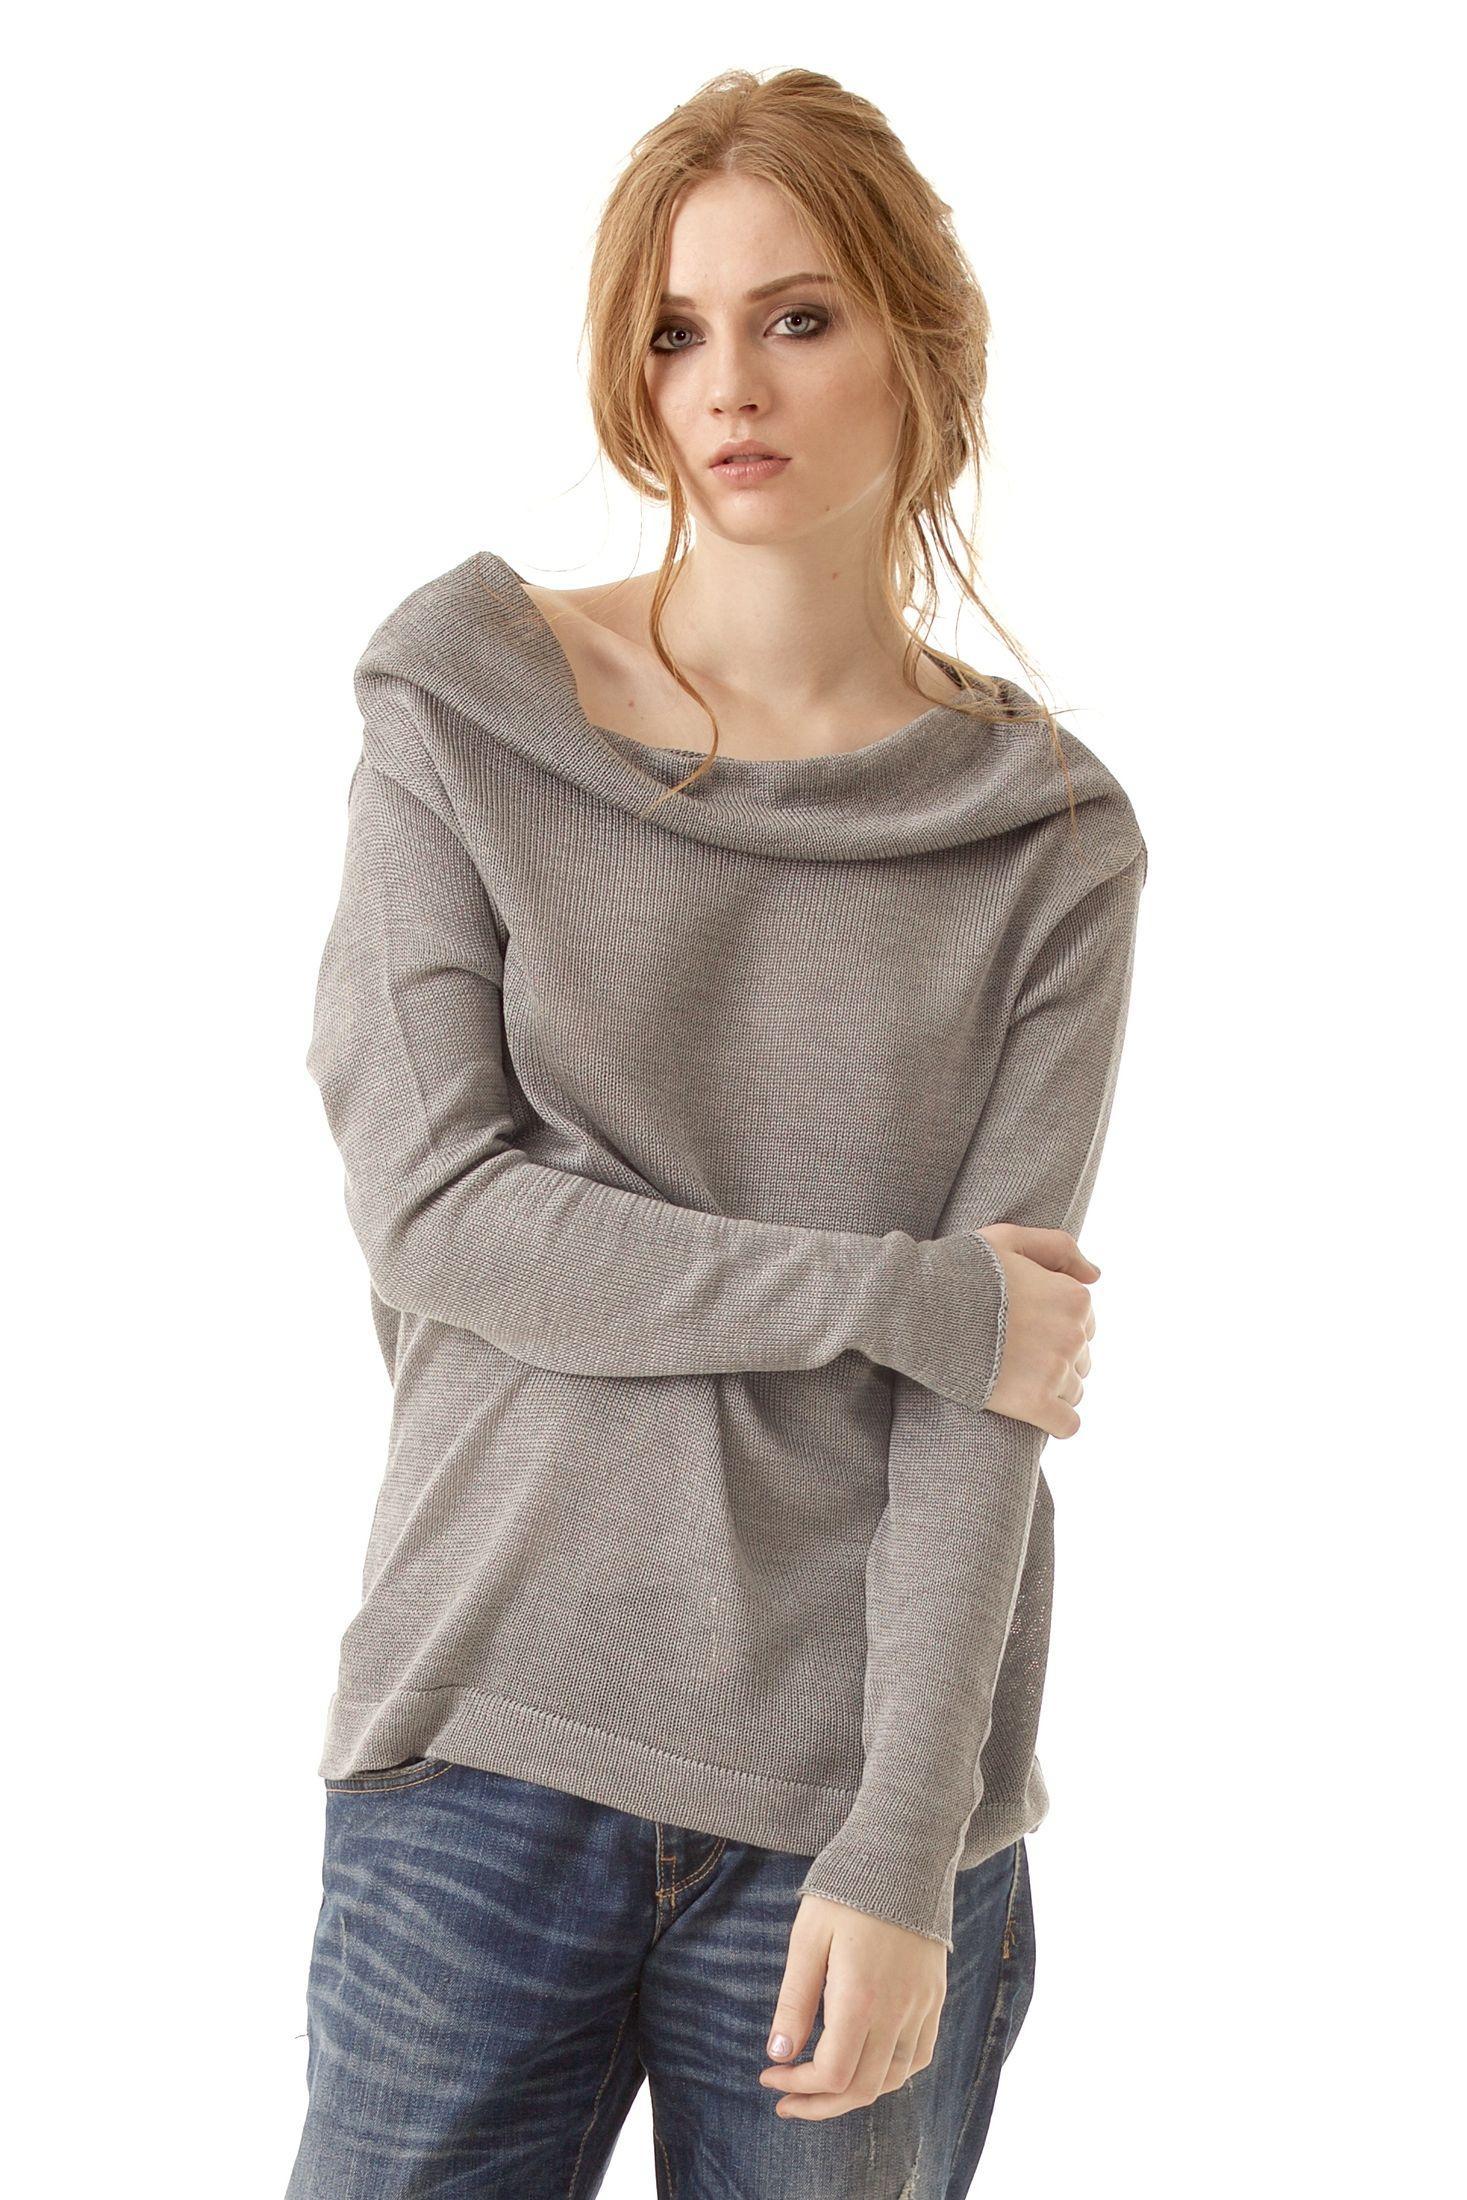 Elevate your style with AGNES, Krista Elsta's bestselling off-the-shoulder grey sweater, crafted entirely from 100% Italian cashmere. Its cowl collar and relaxed fit offer an undeniably chic aesthetic for all occasions.